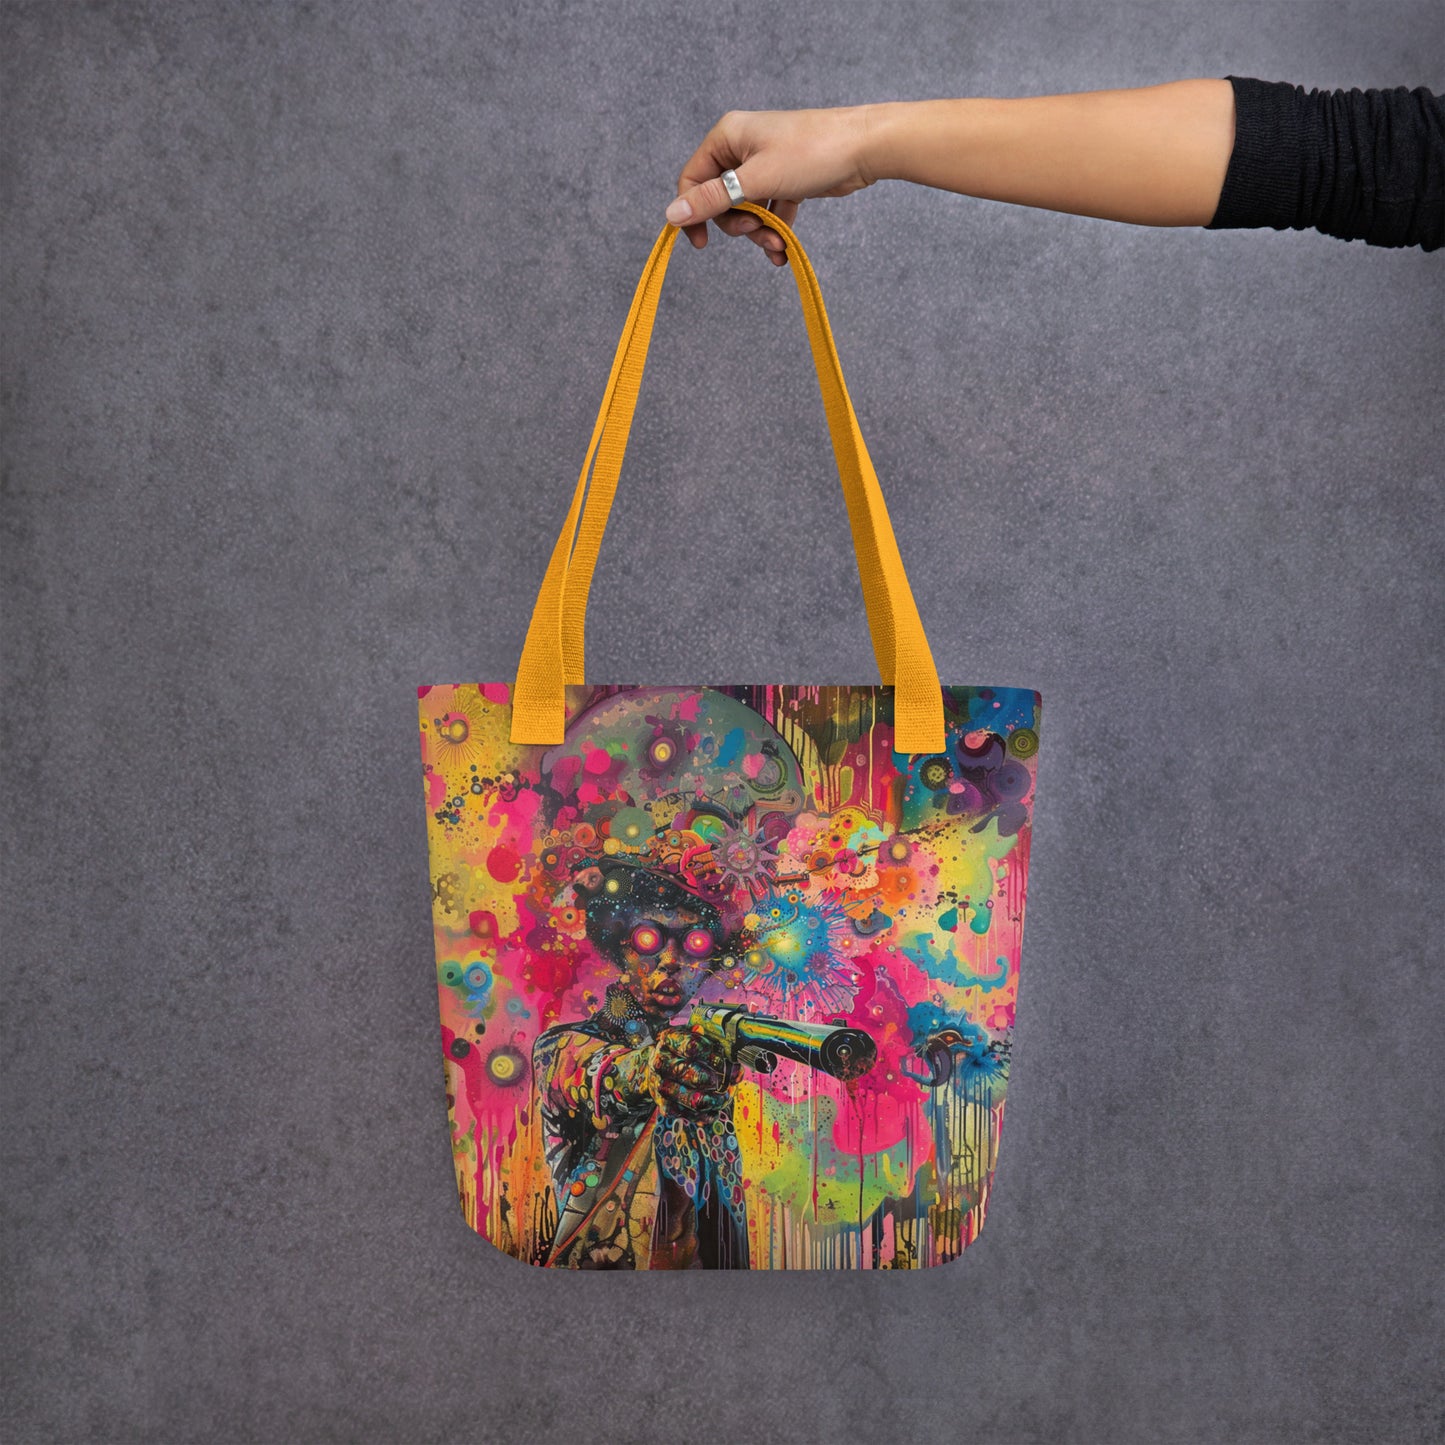 Afro Bussin' Tote Bag